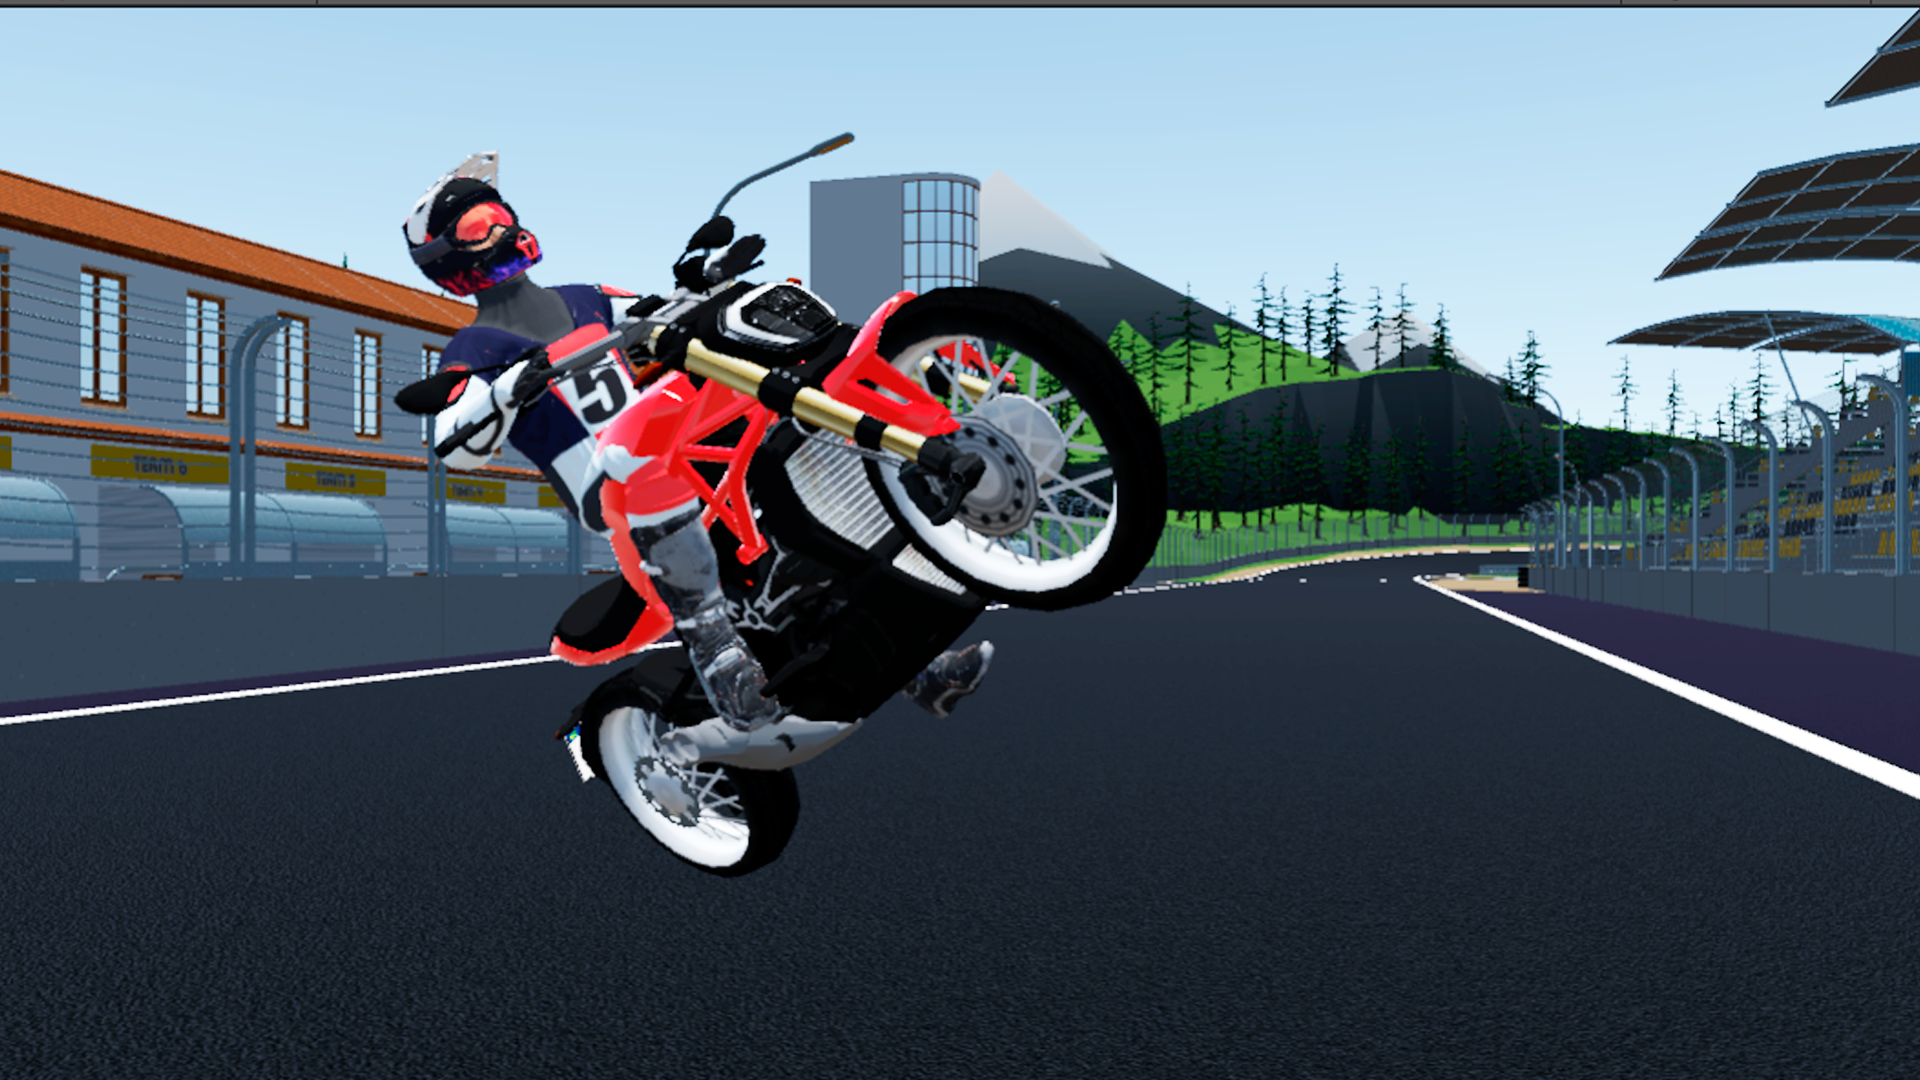 MotoVlog In Brazil Game for Android - Download